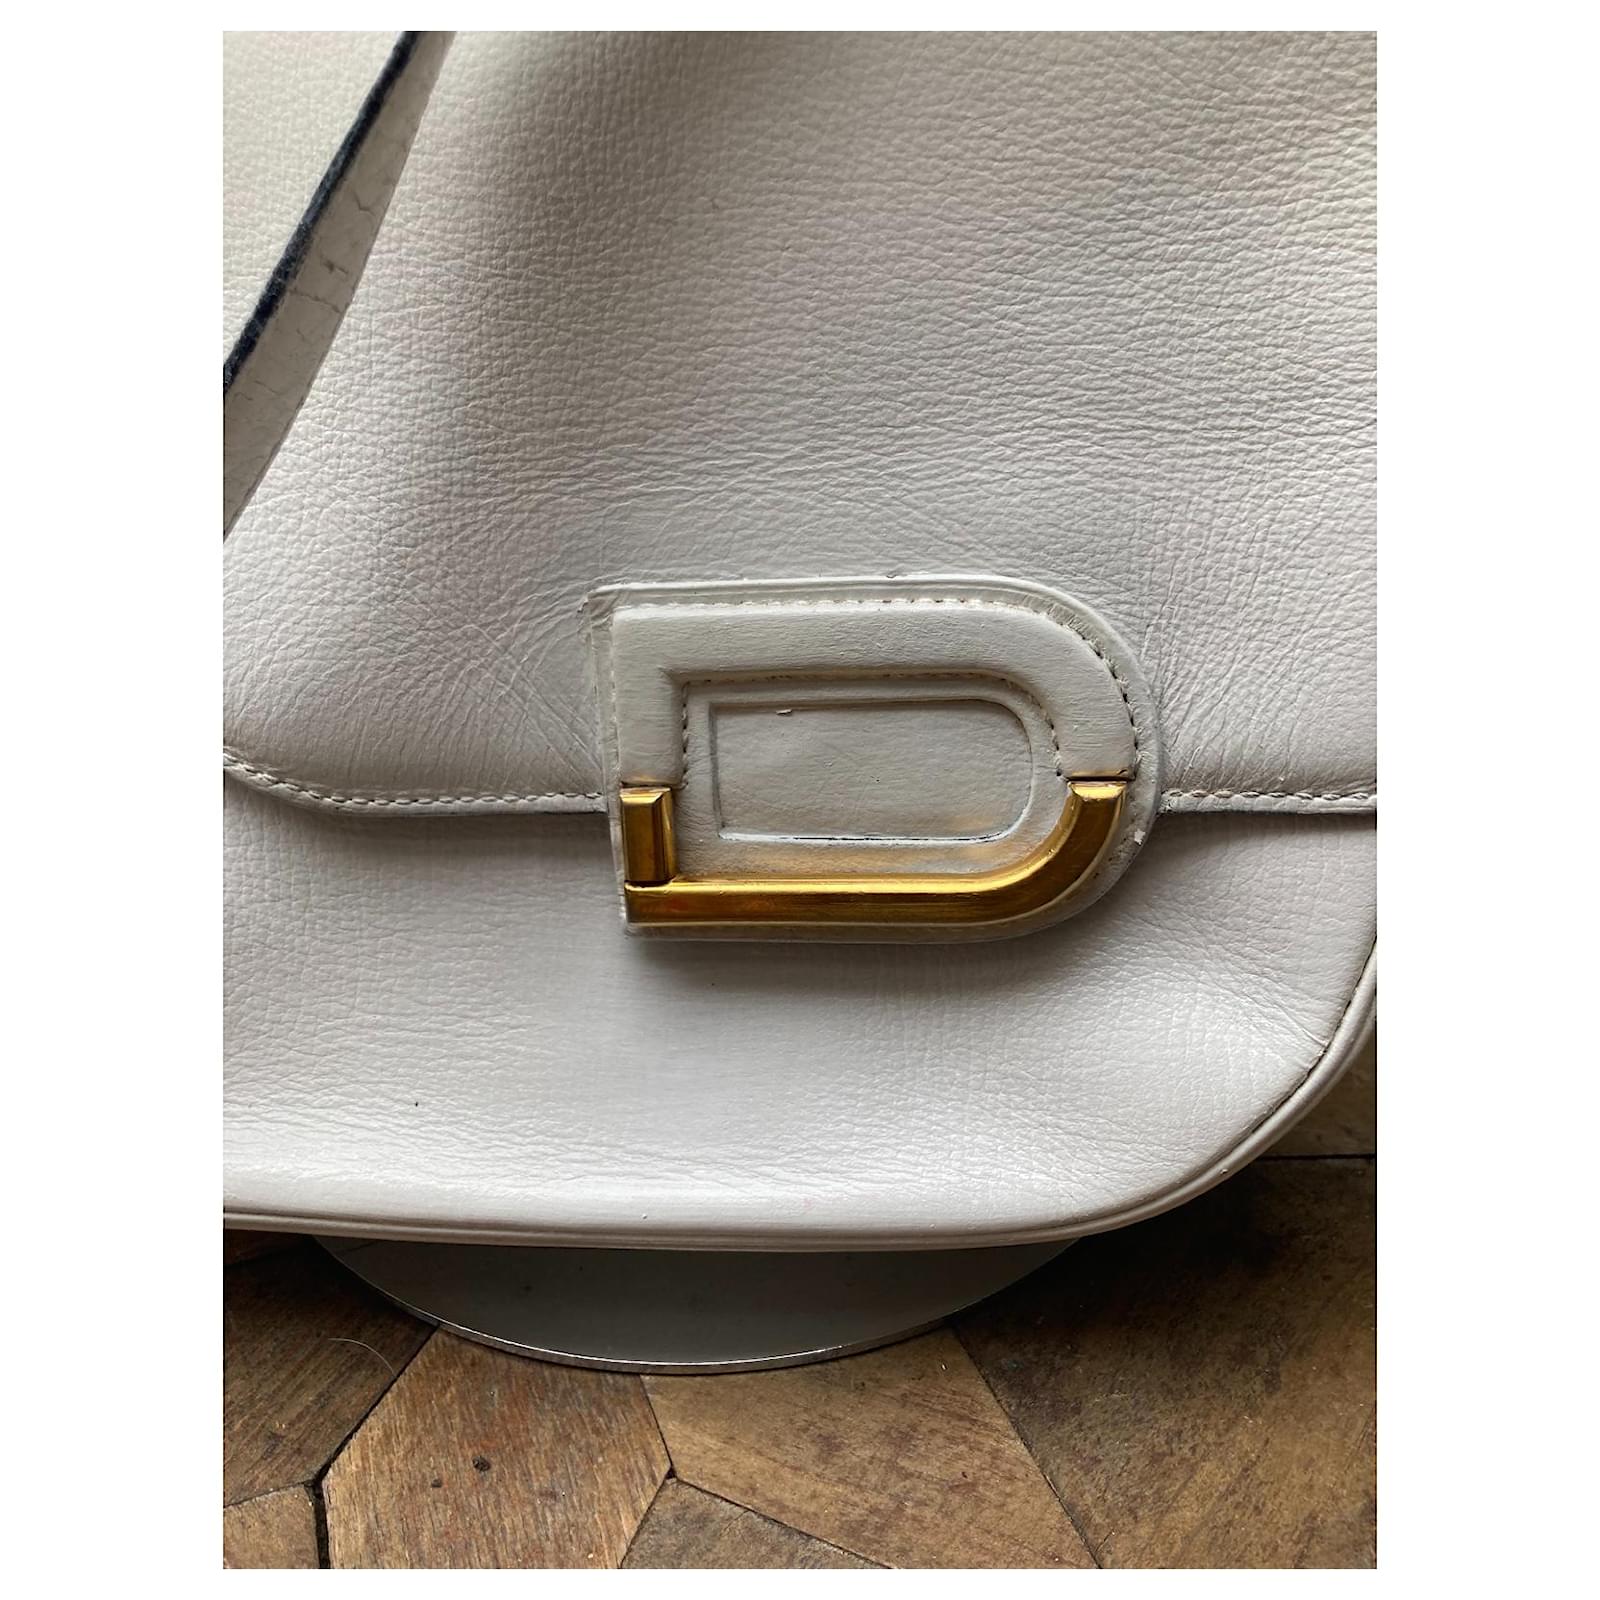 Delvaux rare vintage white leather bag 80s - Katheley's